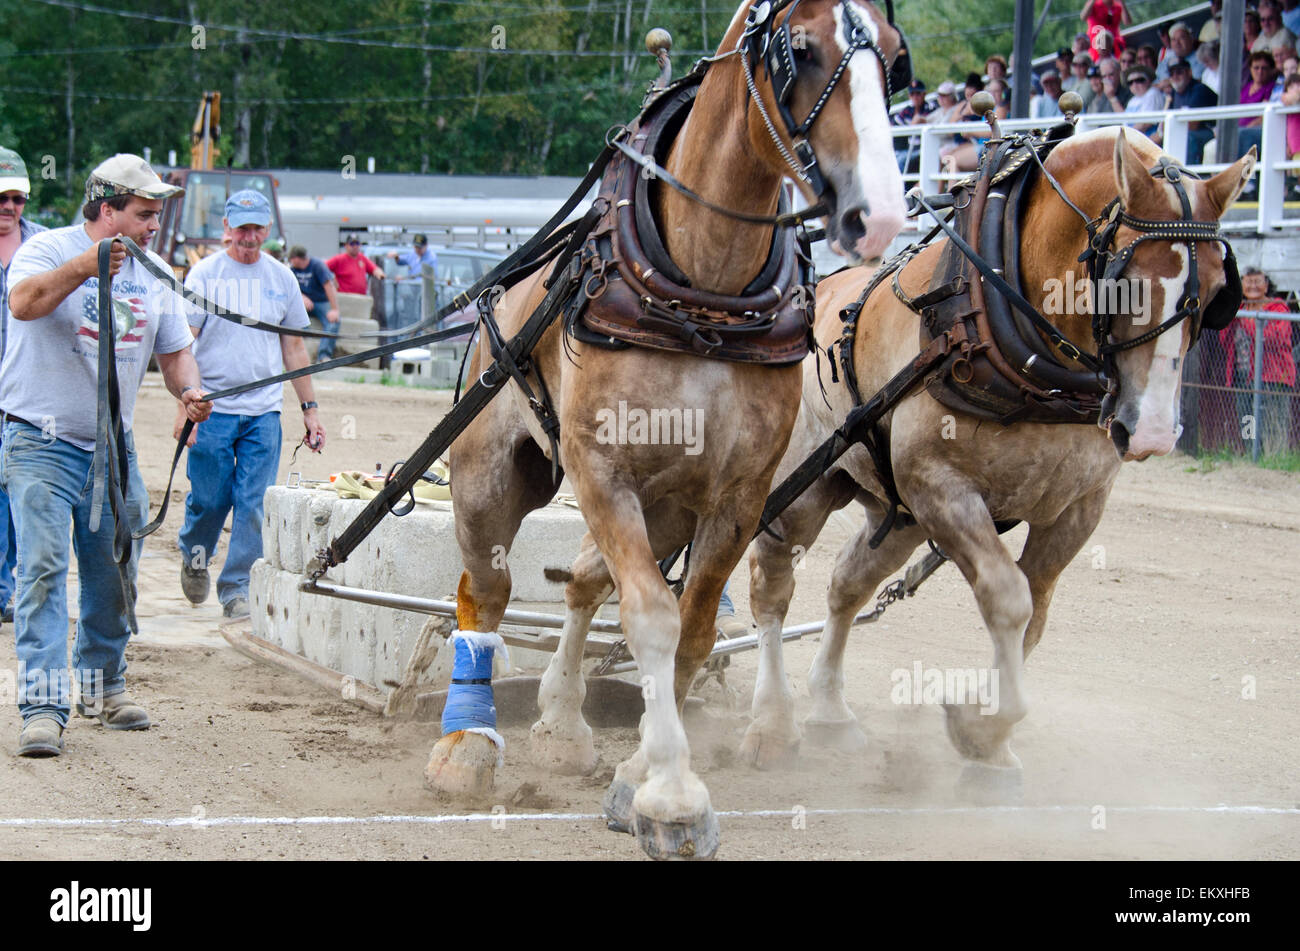 A competitor urges his horses on during the draft horse load-pulling competition at the Blue Hill Fair, Maine. Stock Photo